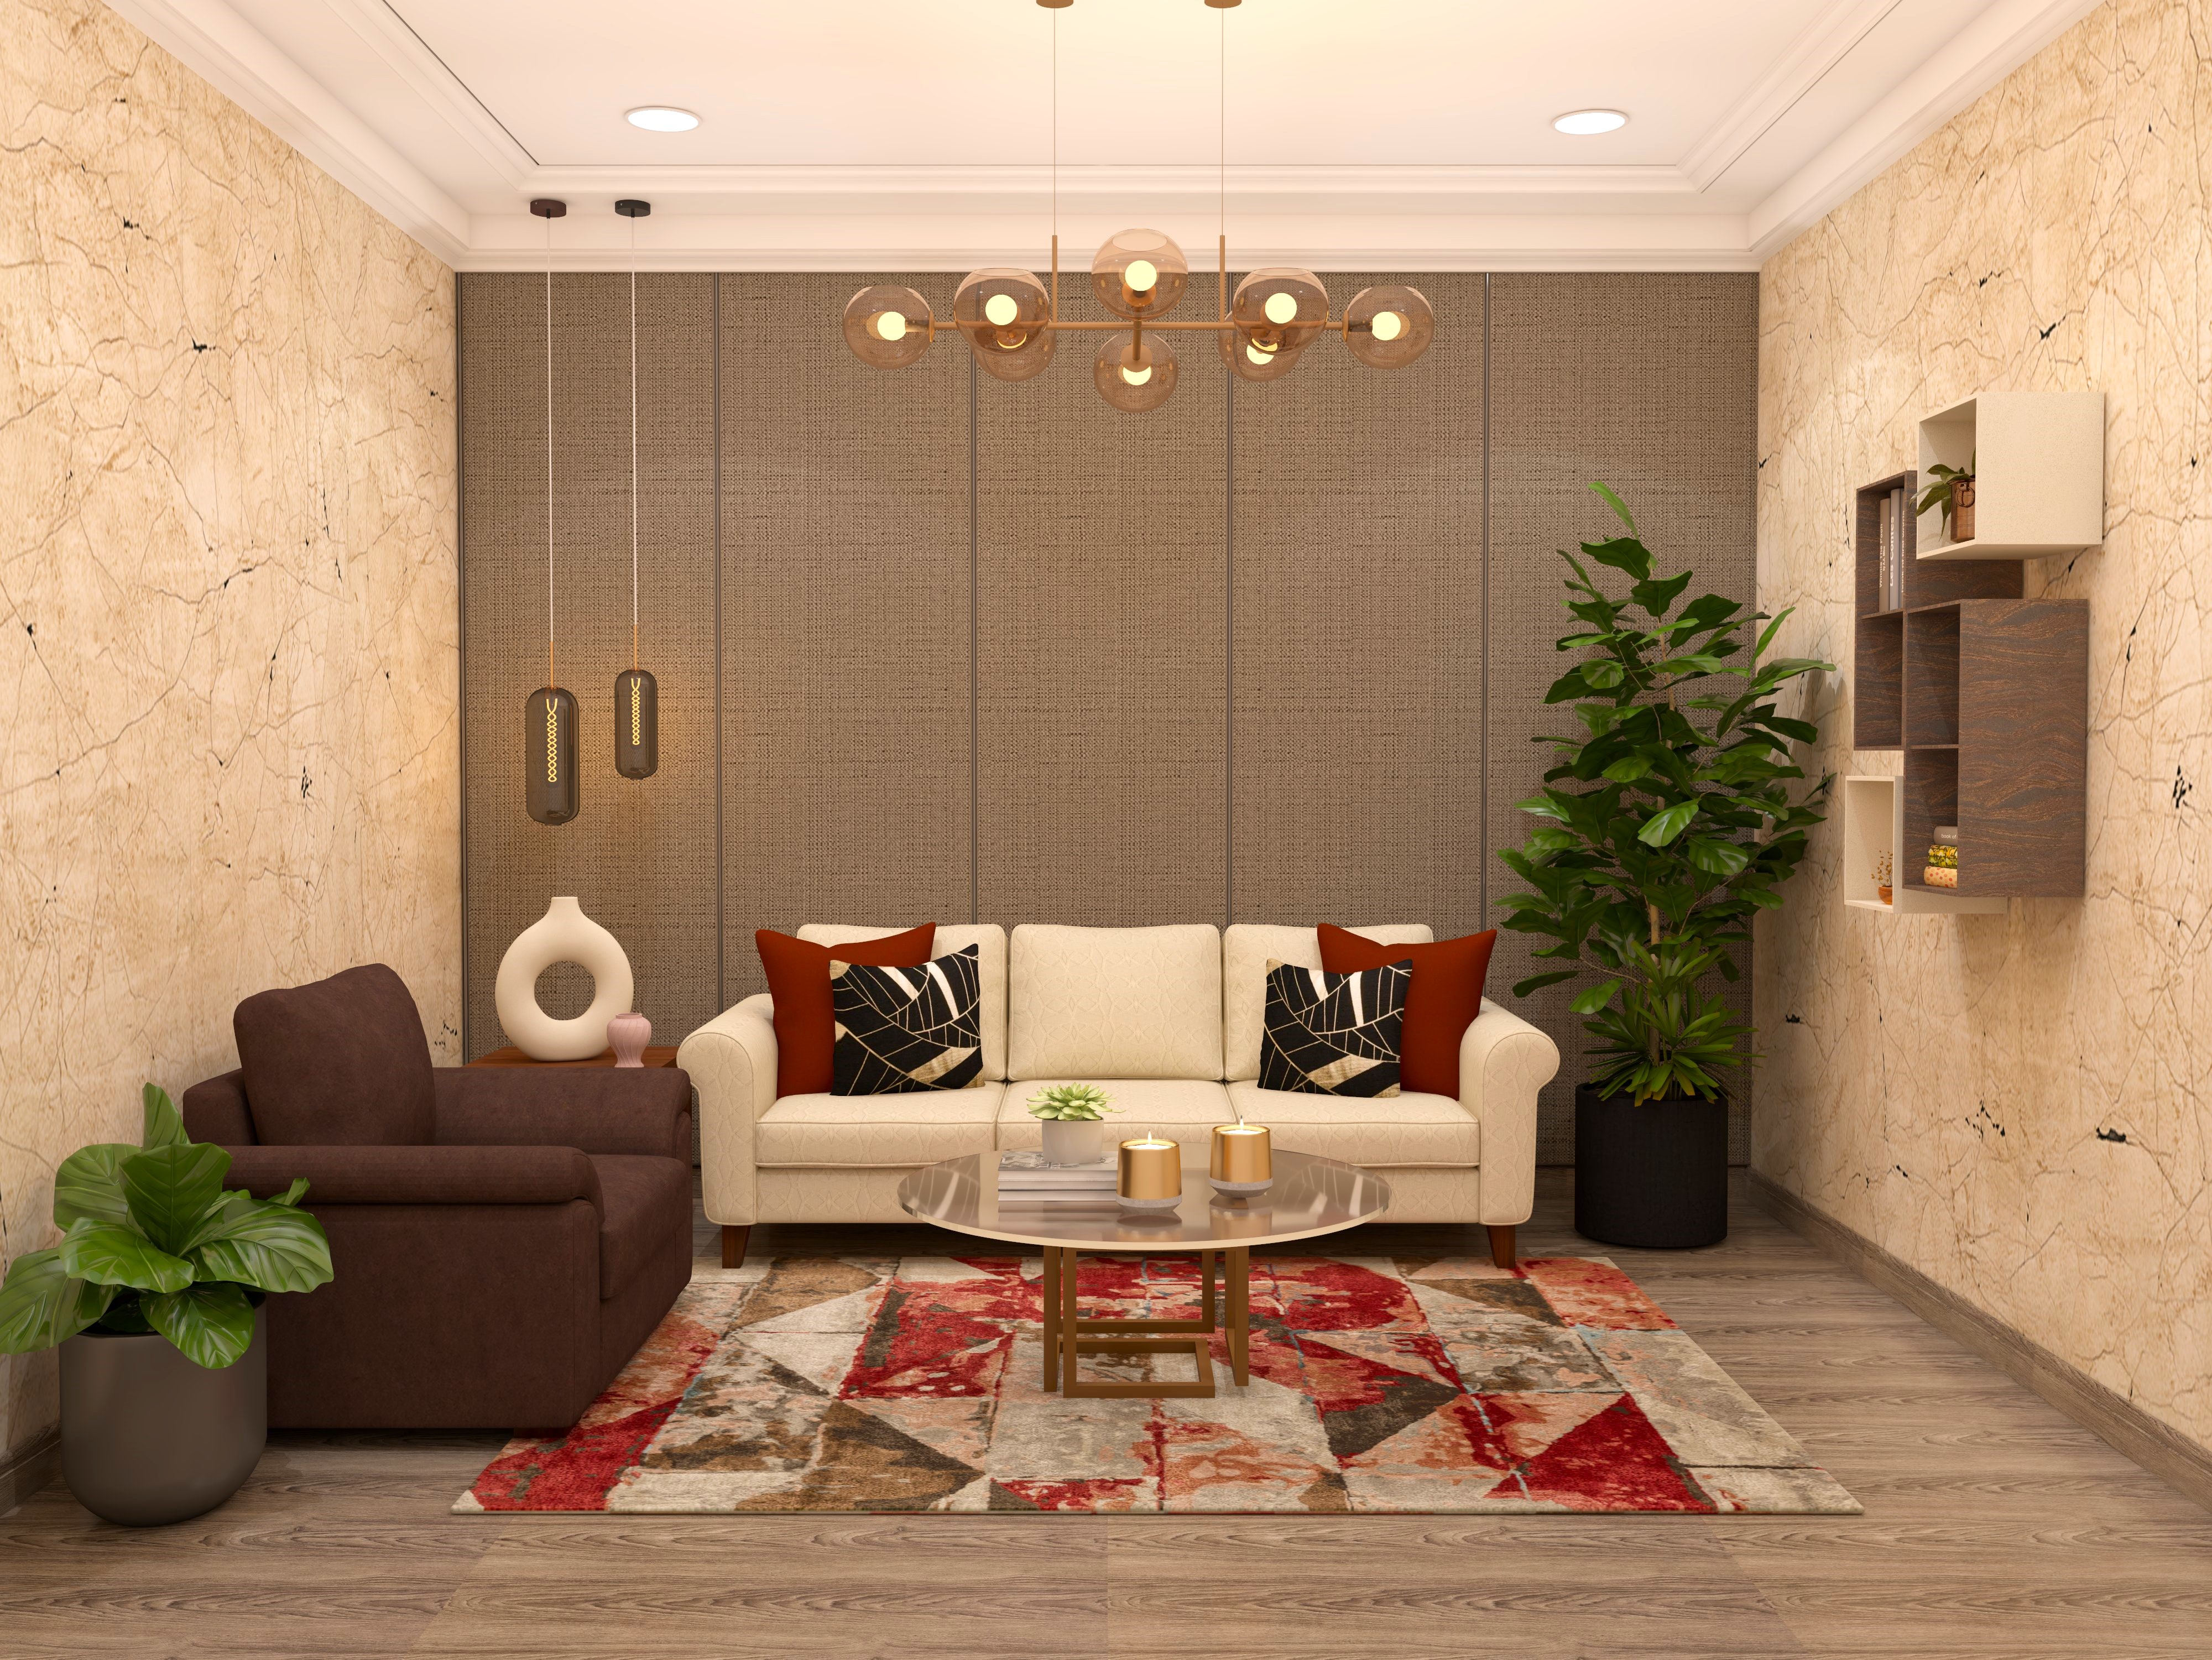 White and brown living room with carpet having red accents-Beautiful Homes